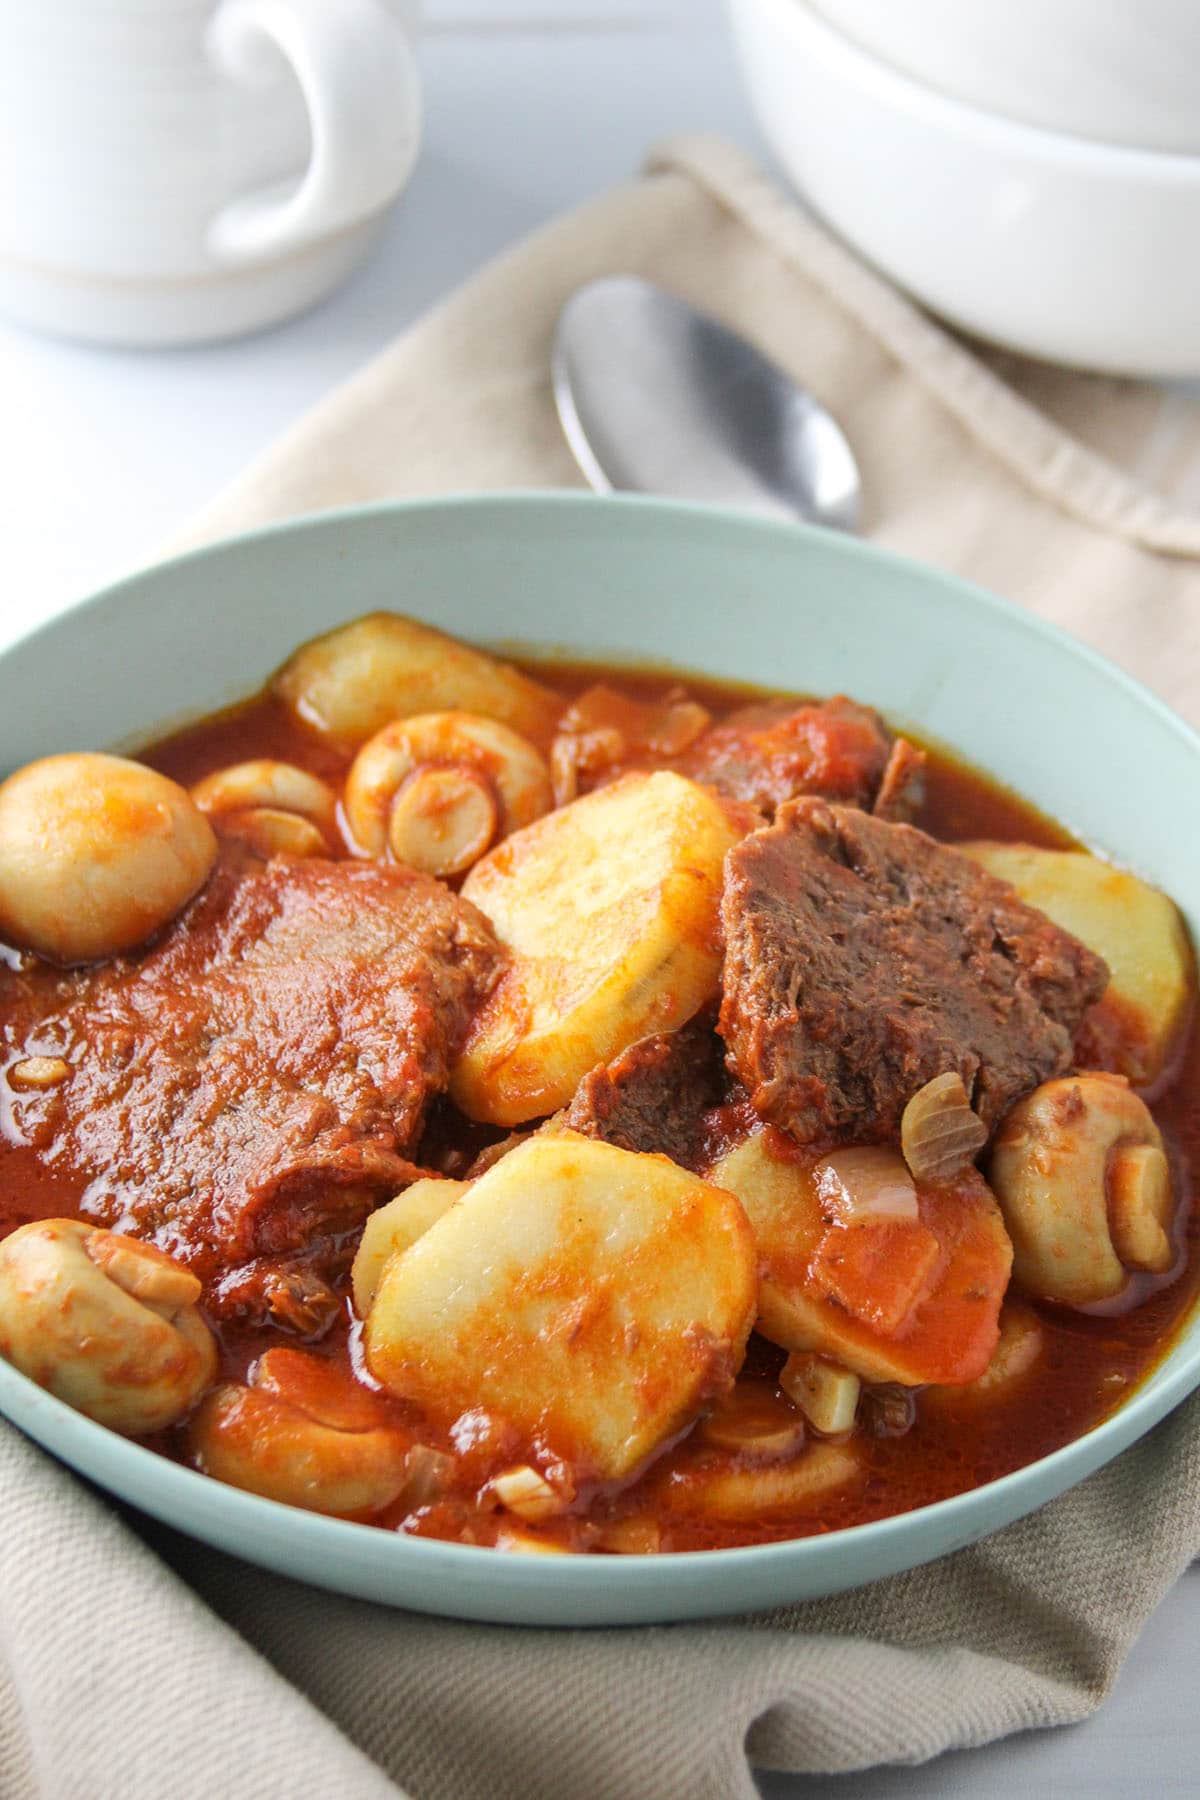 ox tongue stew with mushrooms and potatoes in a blue serving bowl